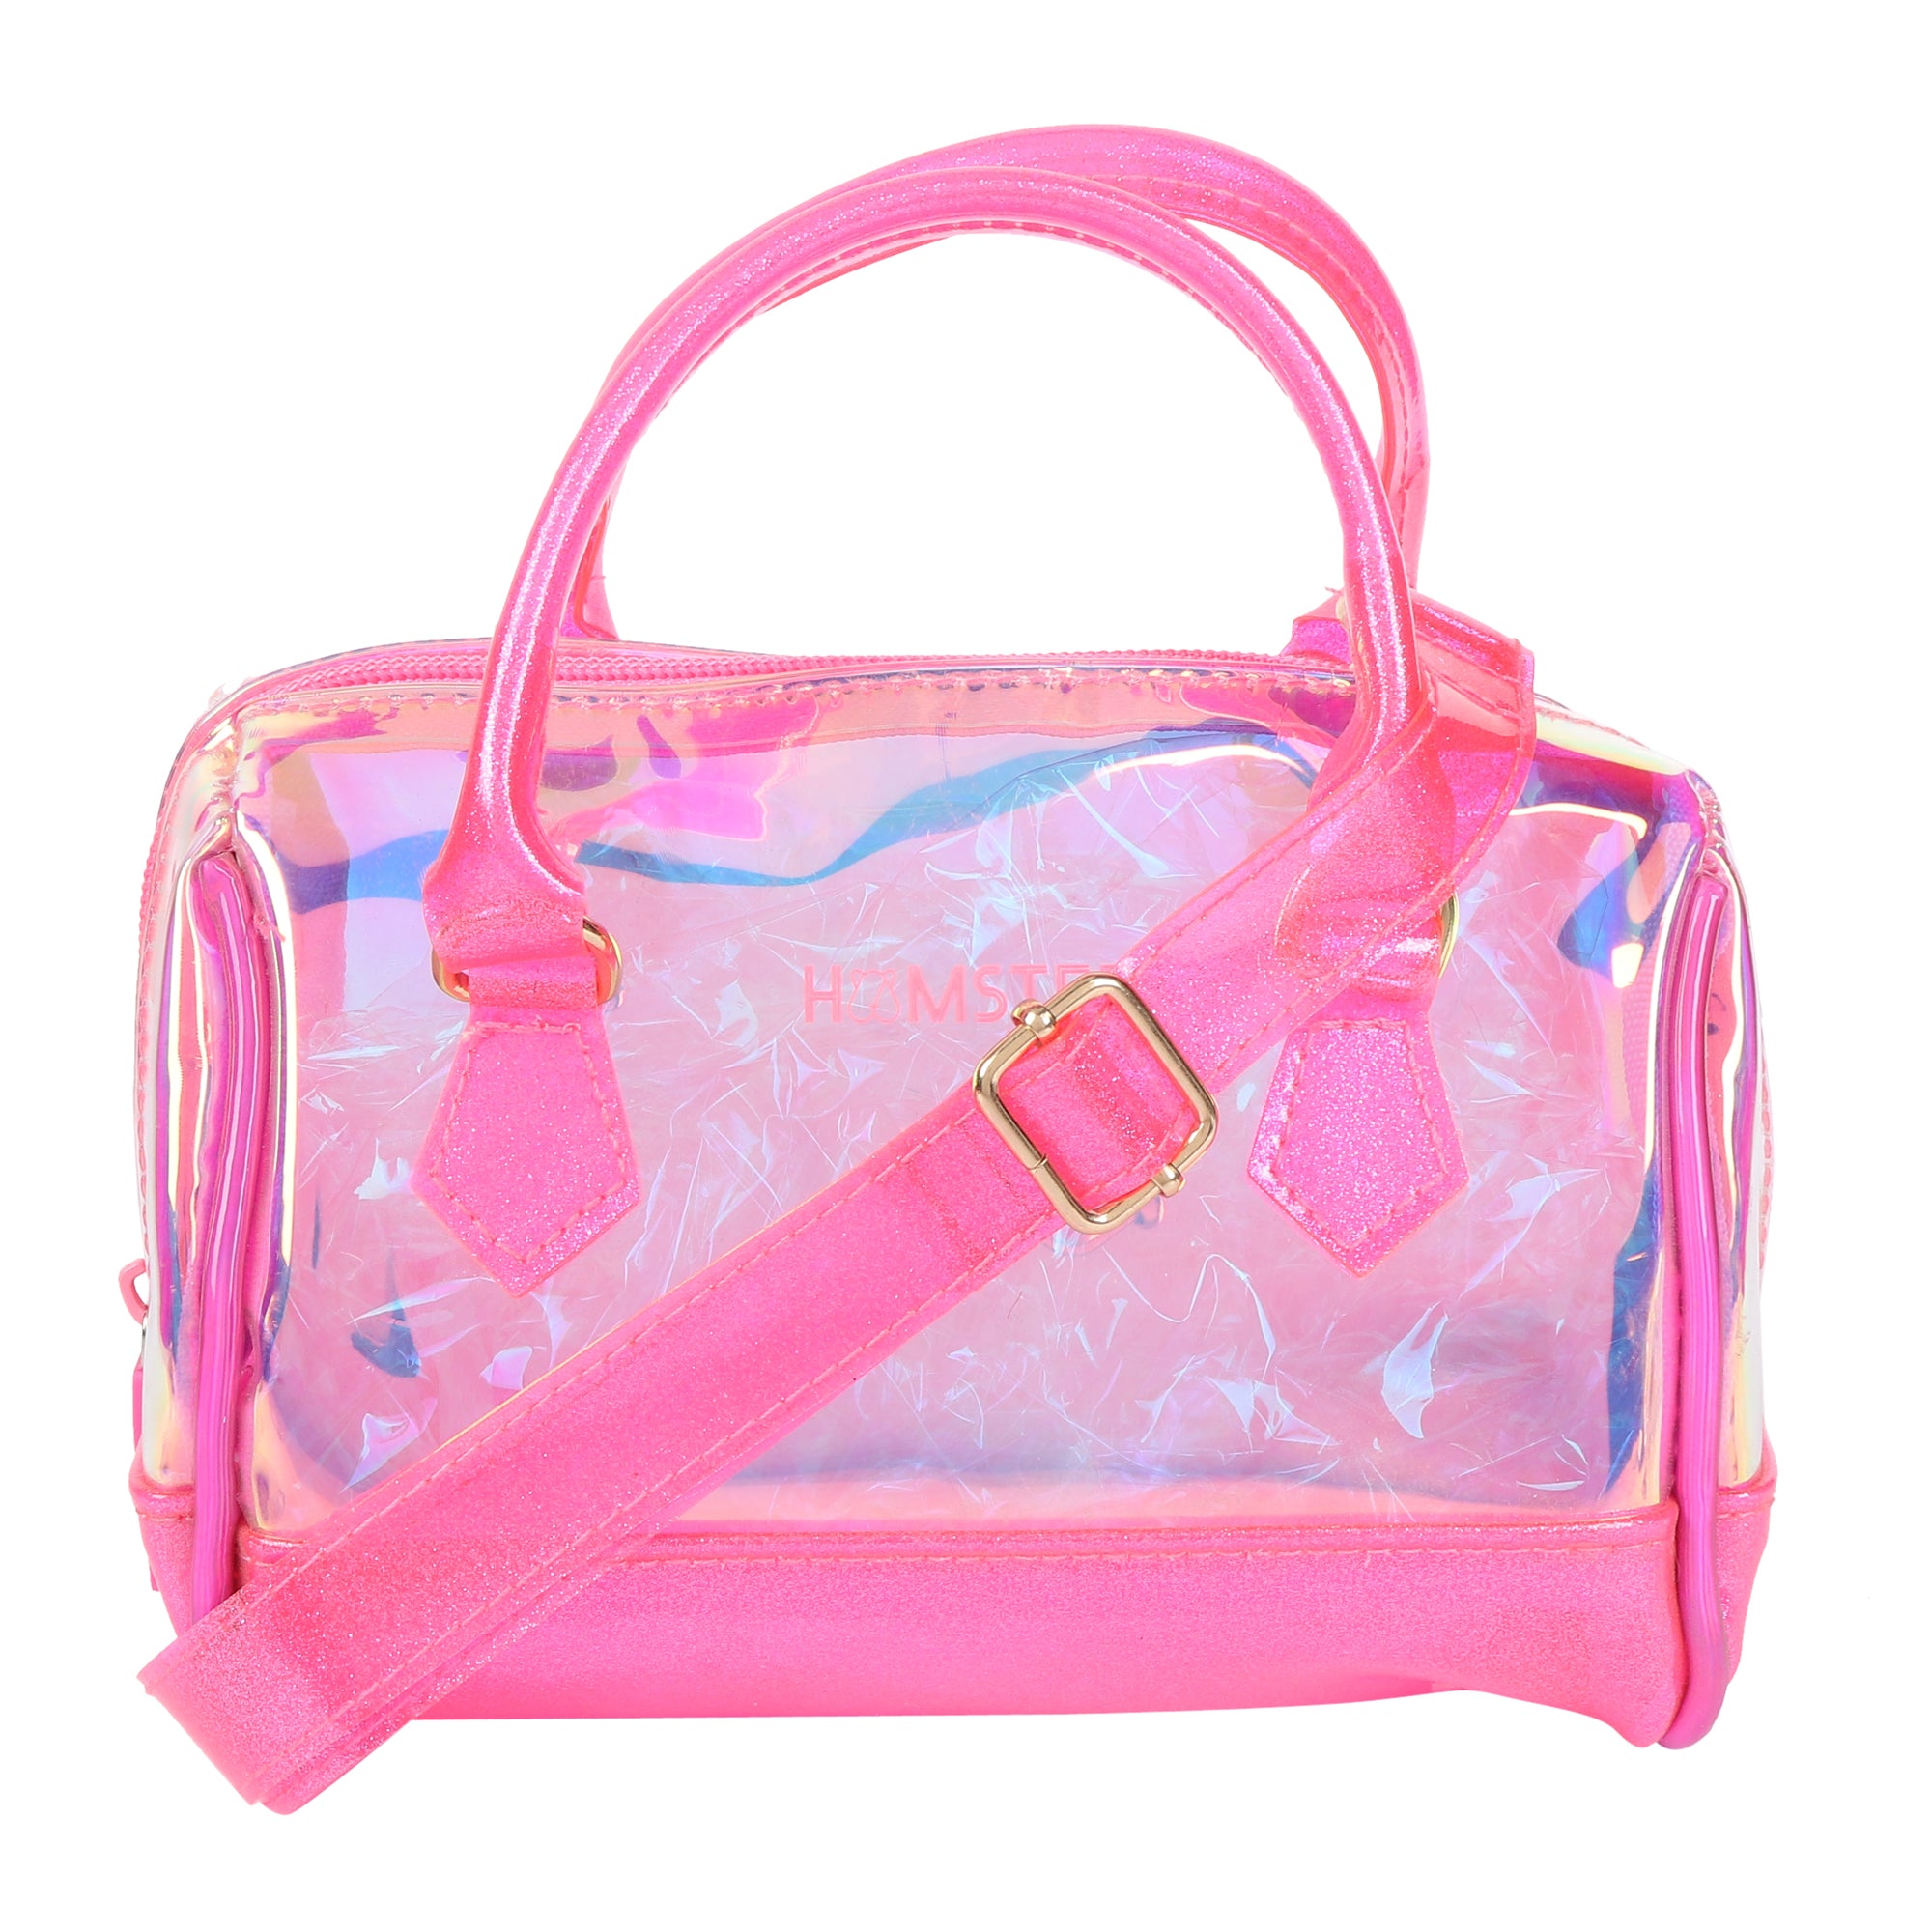 Holo Sling Pink Classic Duffle